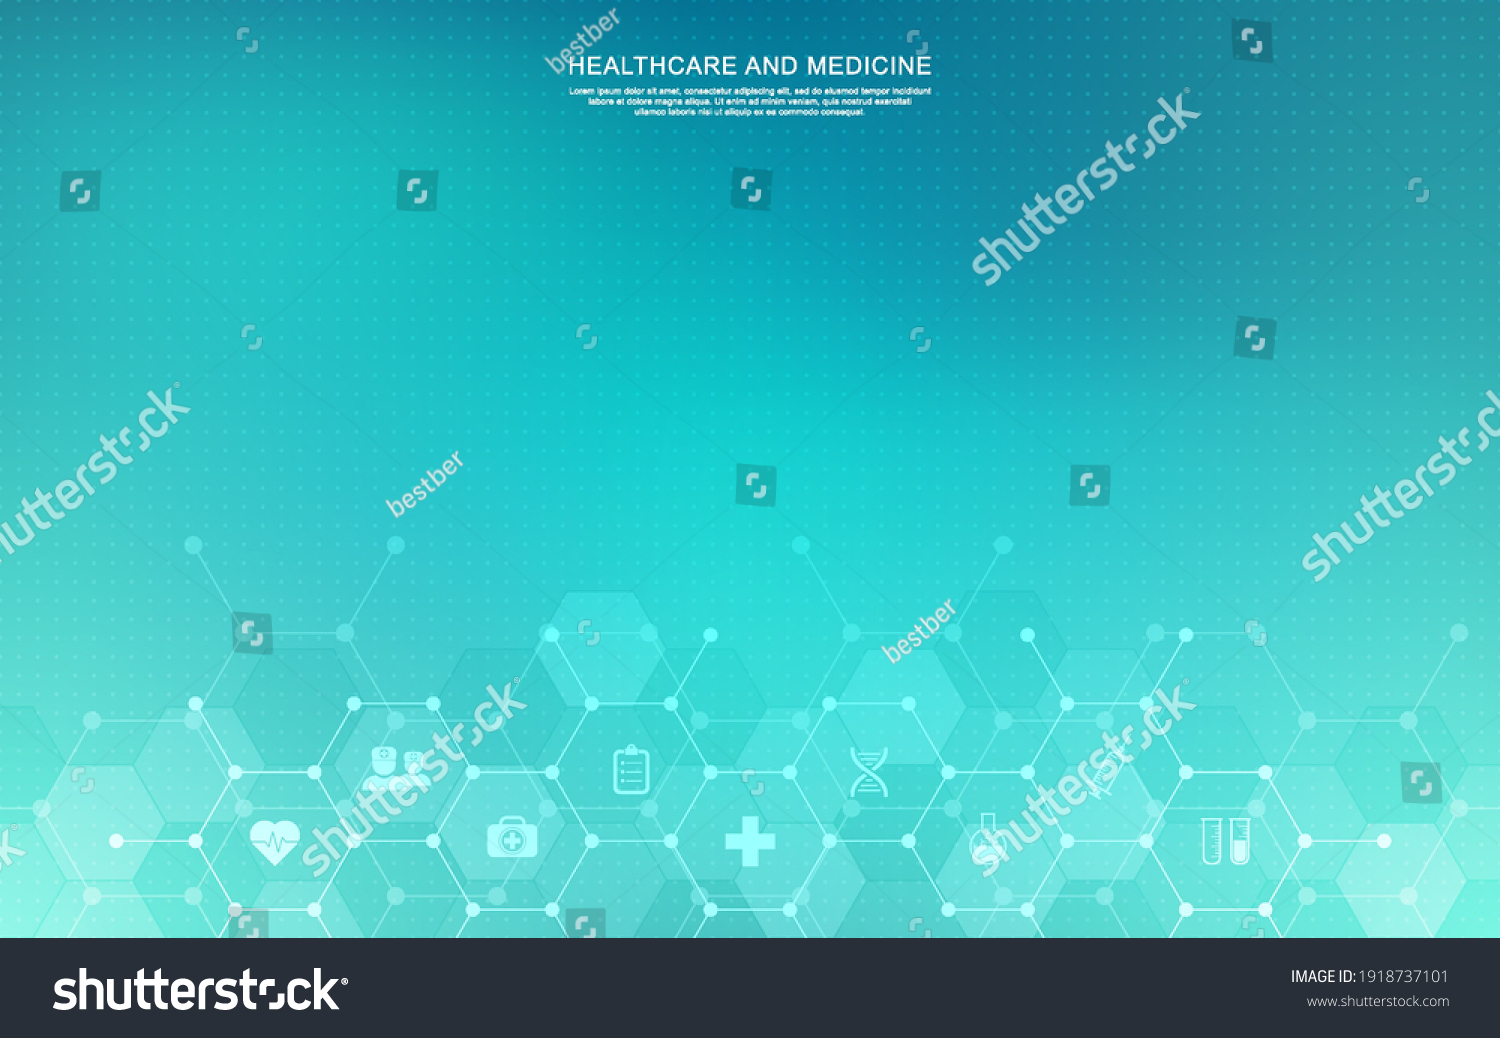 Medical background and healthcare technology with flat icons and symbols. Concept and idea for health care business, innovation medicine, health safety, science, medical research, and development. #1918737101